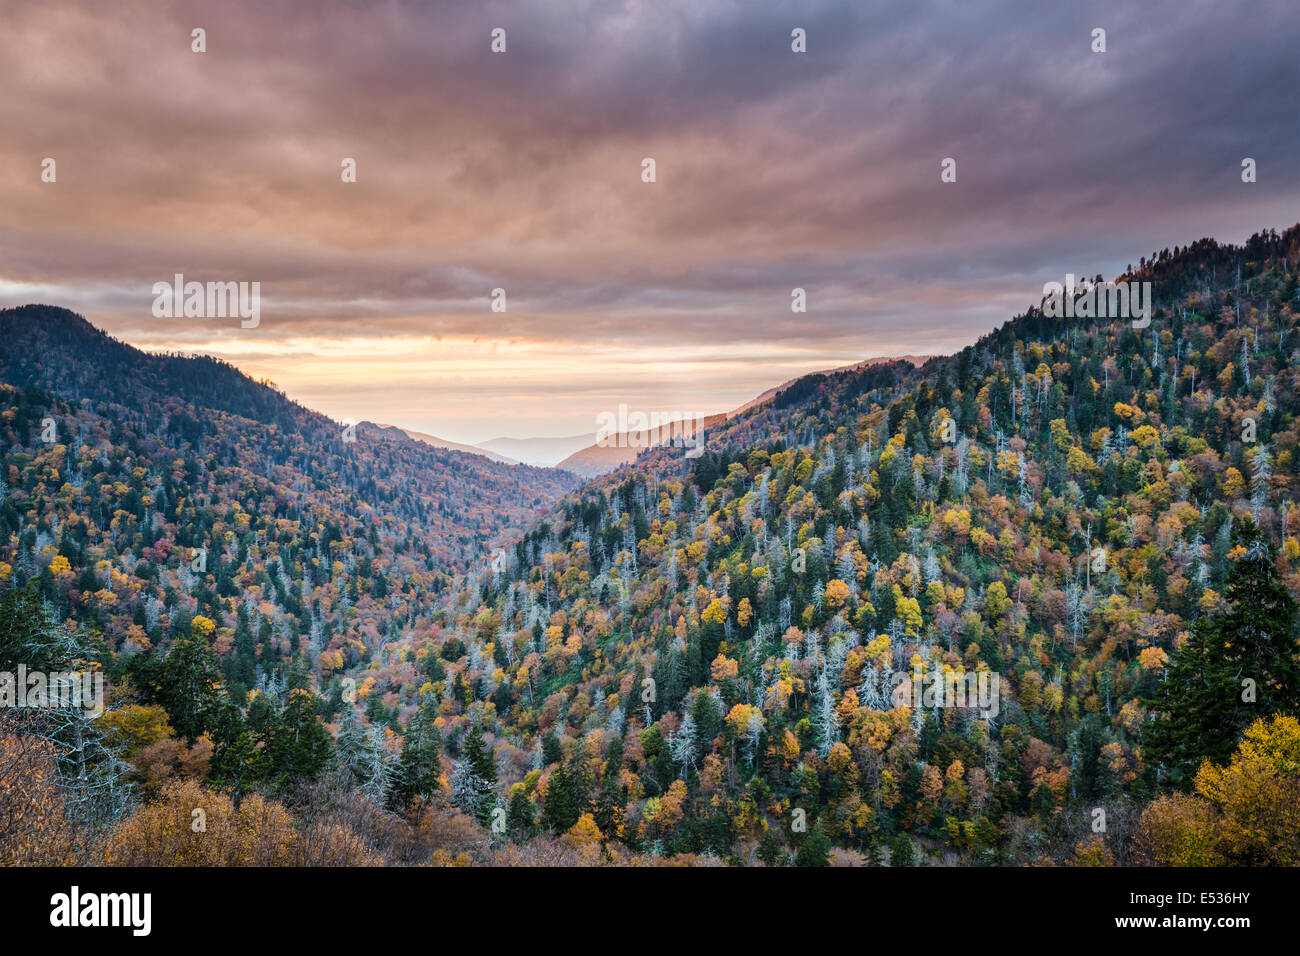 Dawn in the Smoky Mountains National Park, Tennessee, USA. Stock Photo